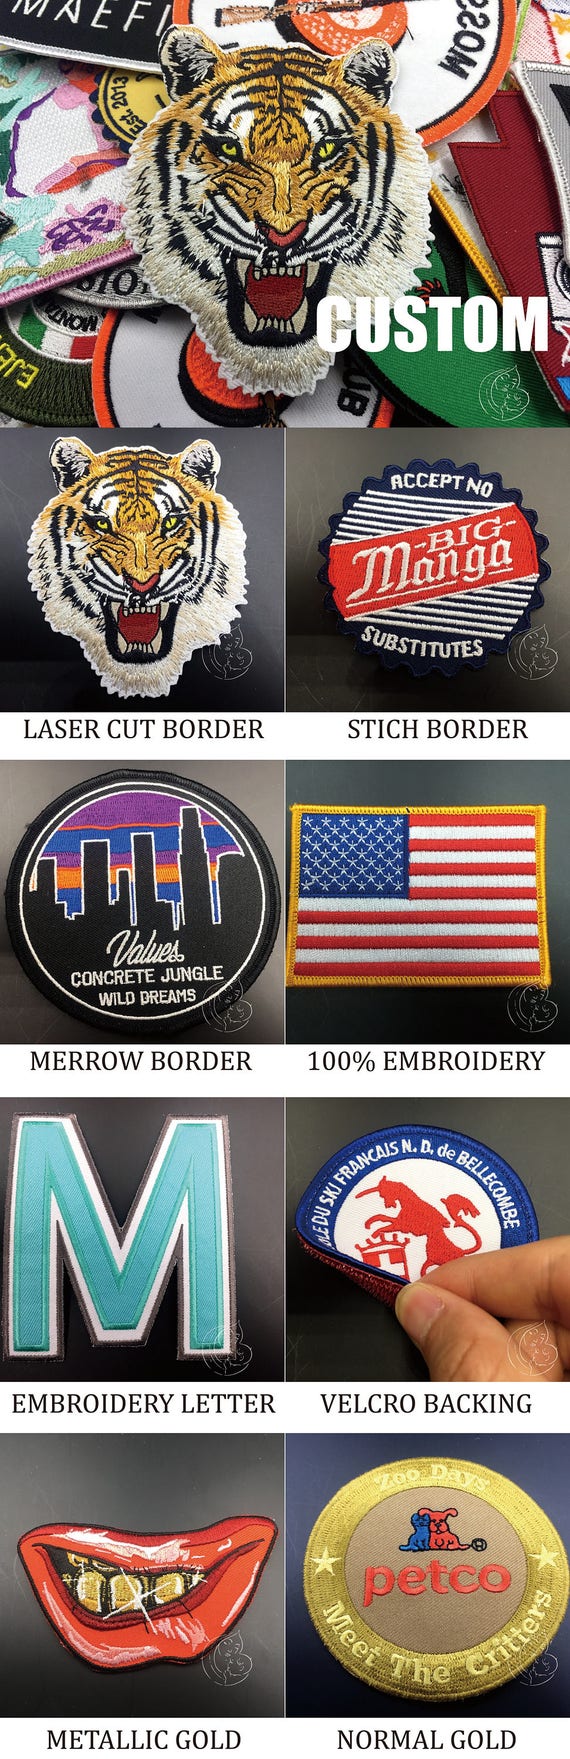 Custom Motorcycle Patches for Vest, Custom Embroidered Motorcycle Patches,  Motorcycle Patches Custom, Motorcycle Club Patch Maker 